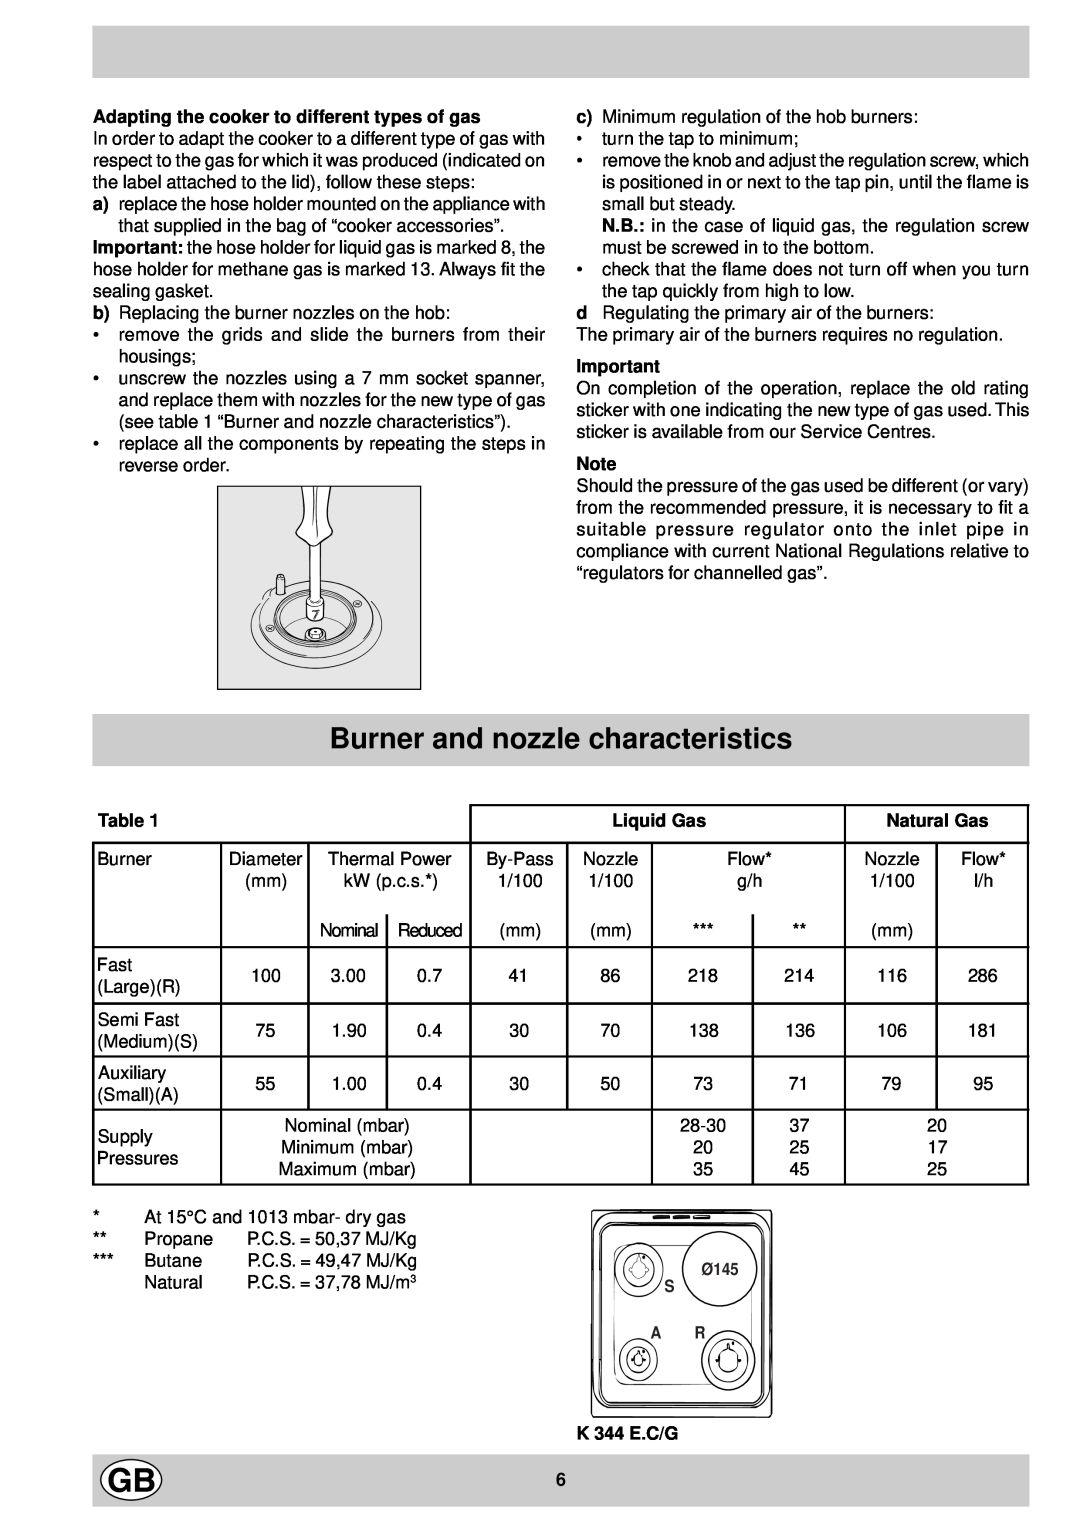 Indesit K 344 E.C/G manual Burner and nozzle characteristics, Adapting the cooker to different types of gas, Liquid Gas 